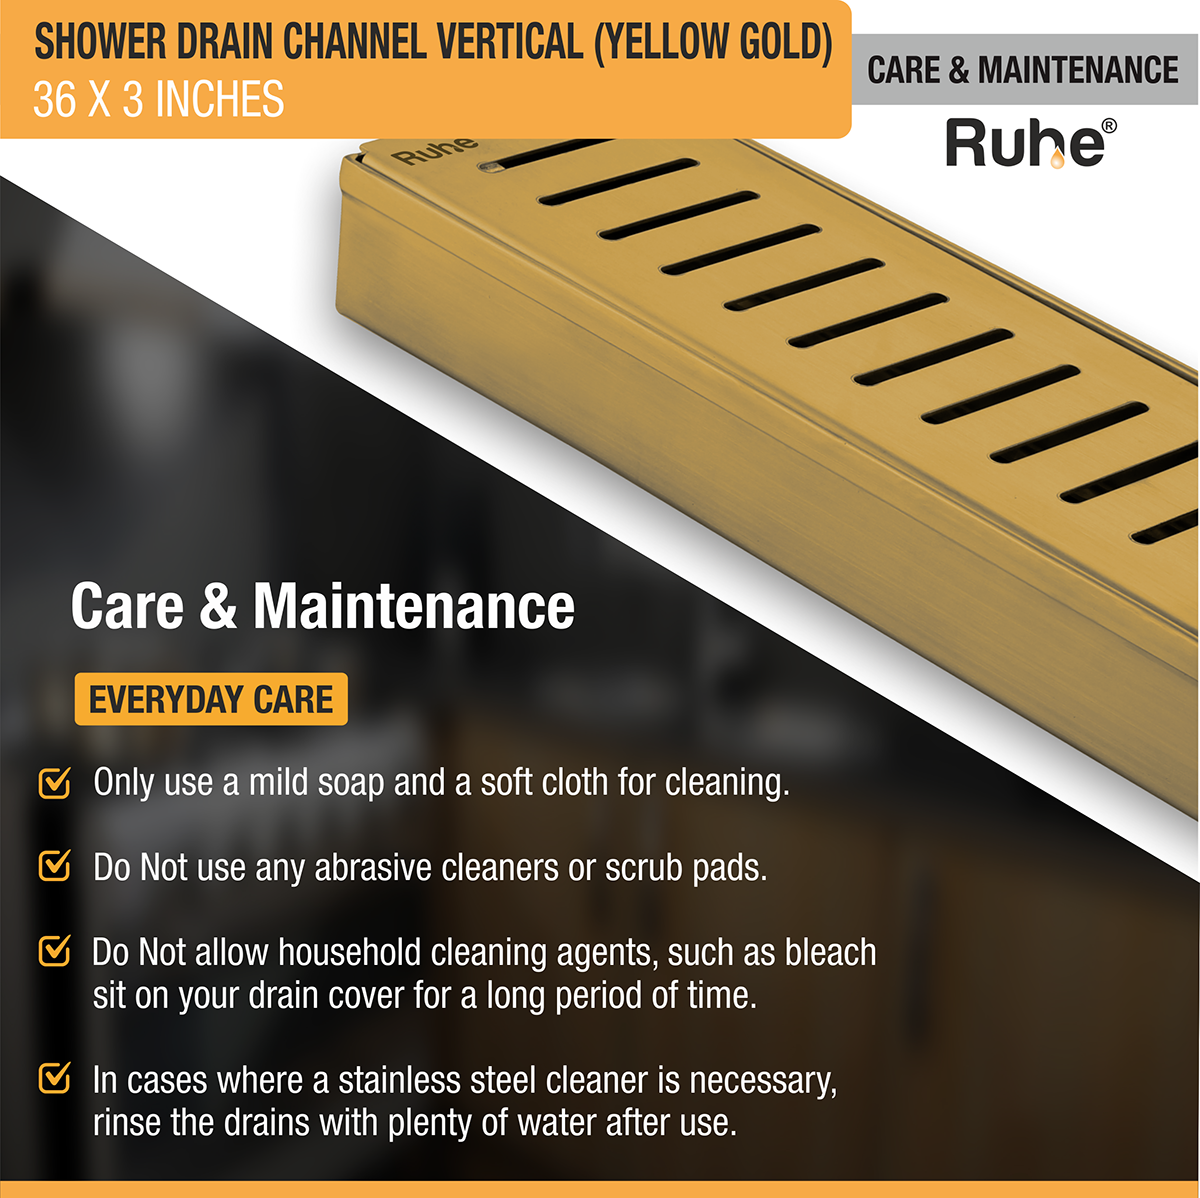 Vertical Shower Drain Channel (36 x 3 Inches) YELLOW GOLD care and maintenance